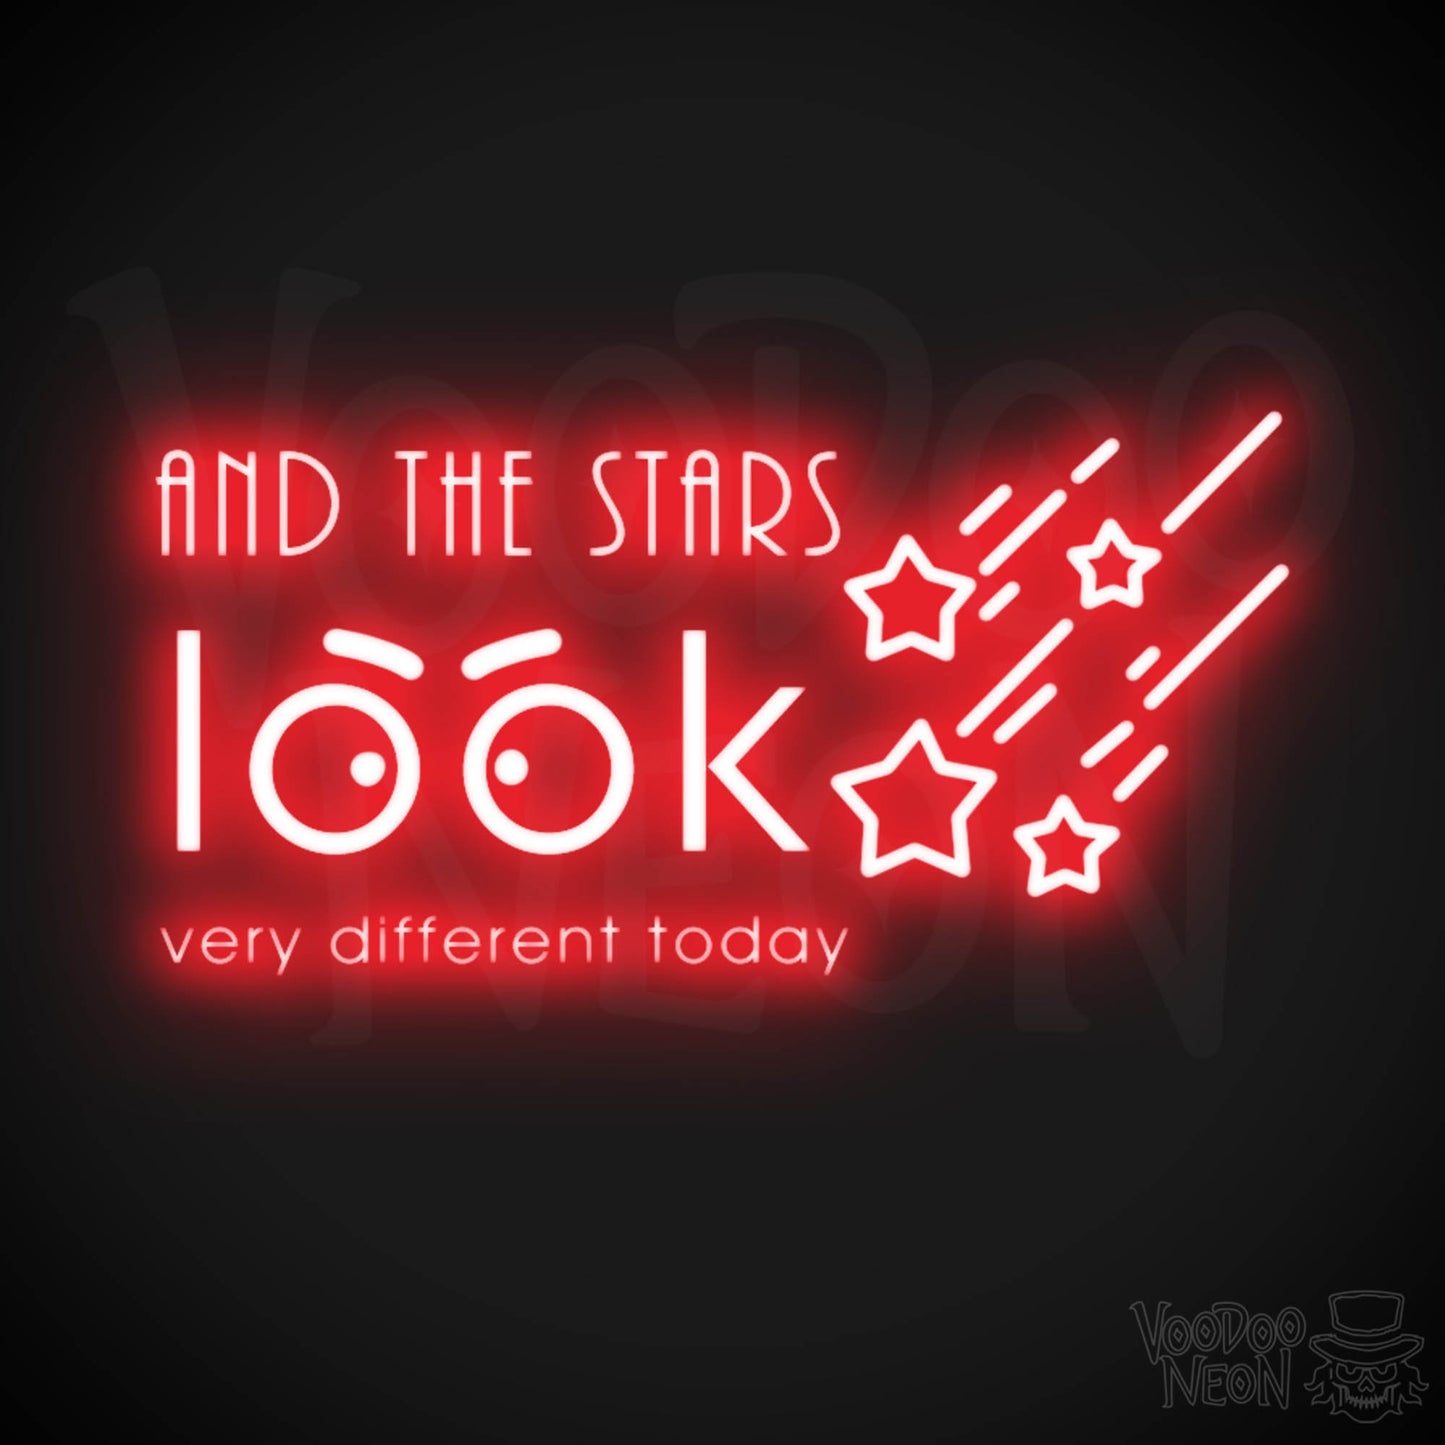 And the Stars Look Very Different Today Neon Sign - LED Wall Art - Color Red